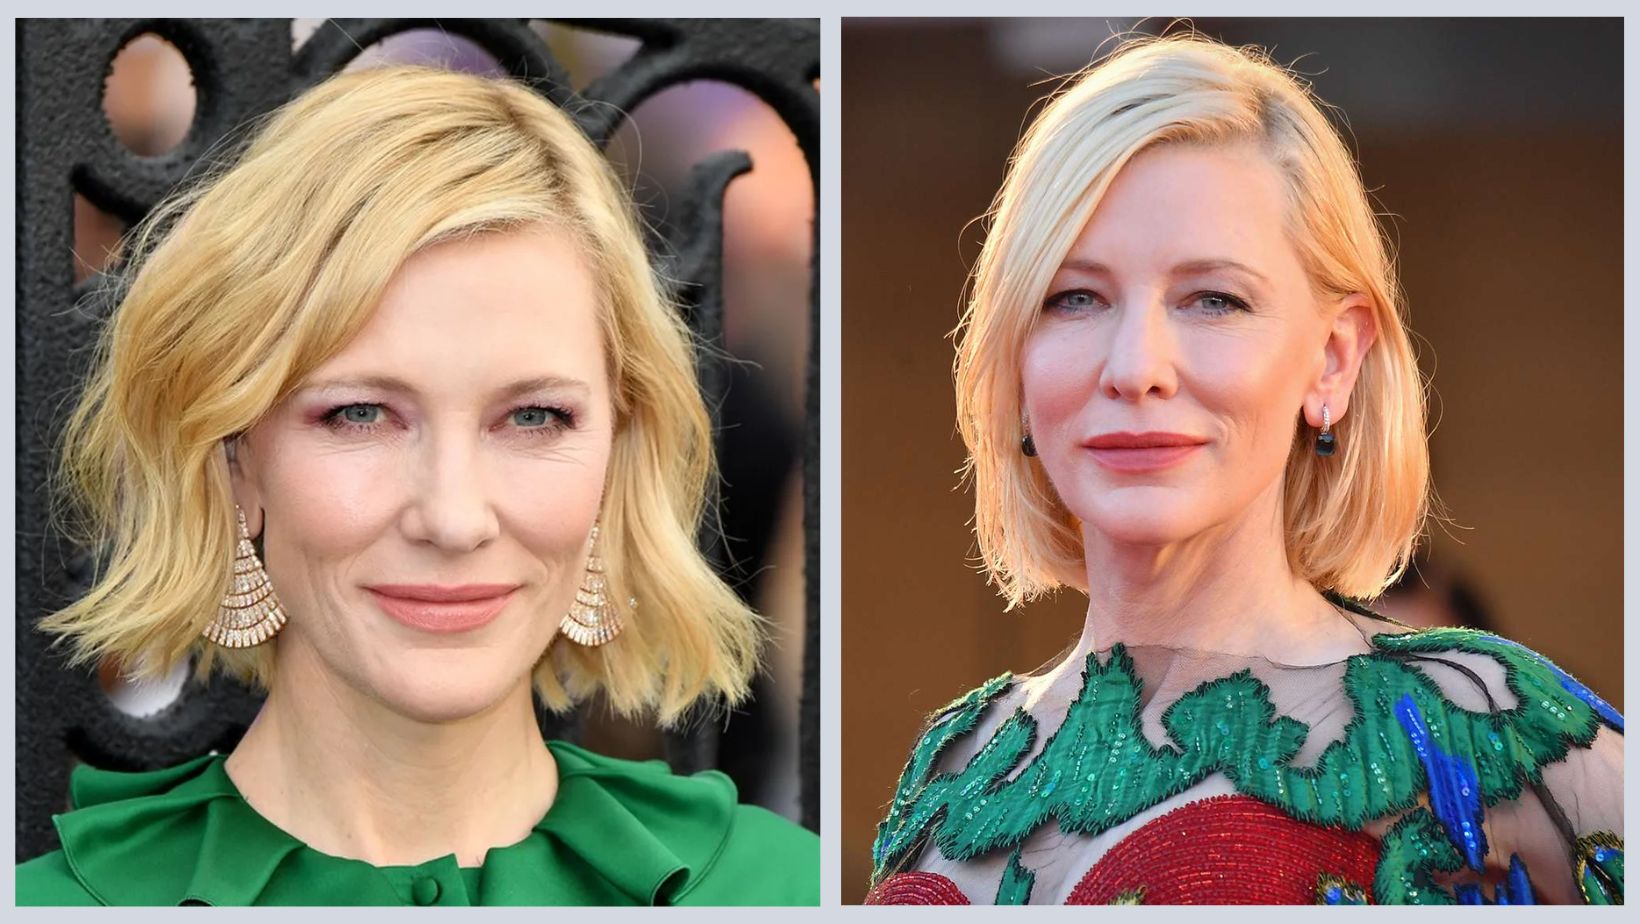 Has Cate Blanchett Ever Done Plastic Surgery?